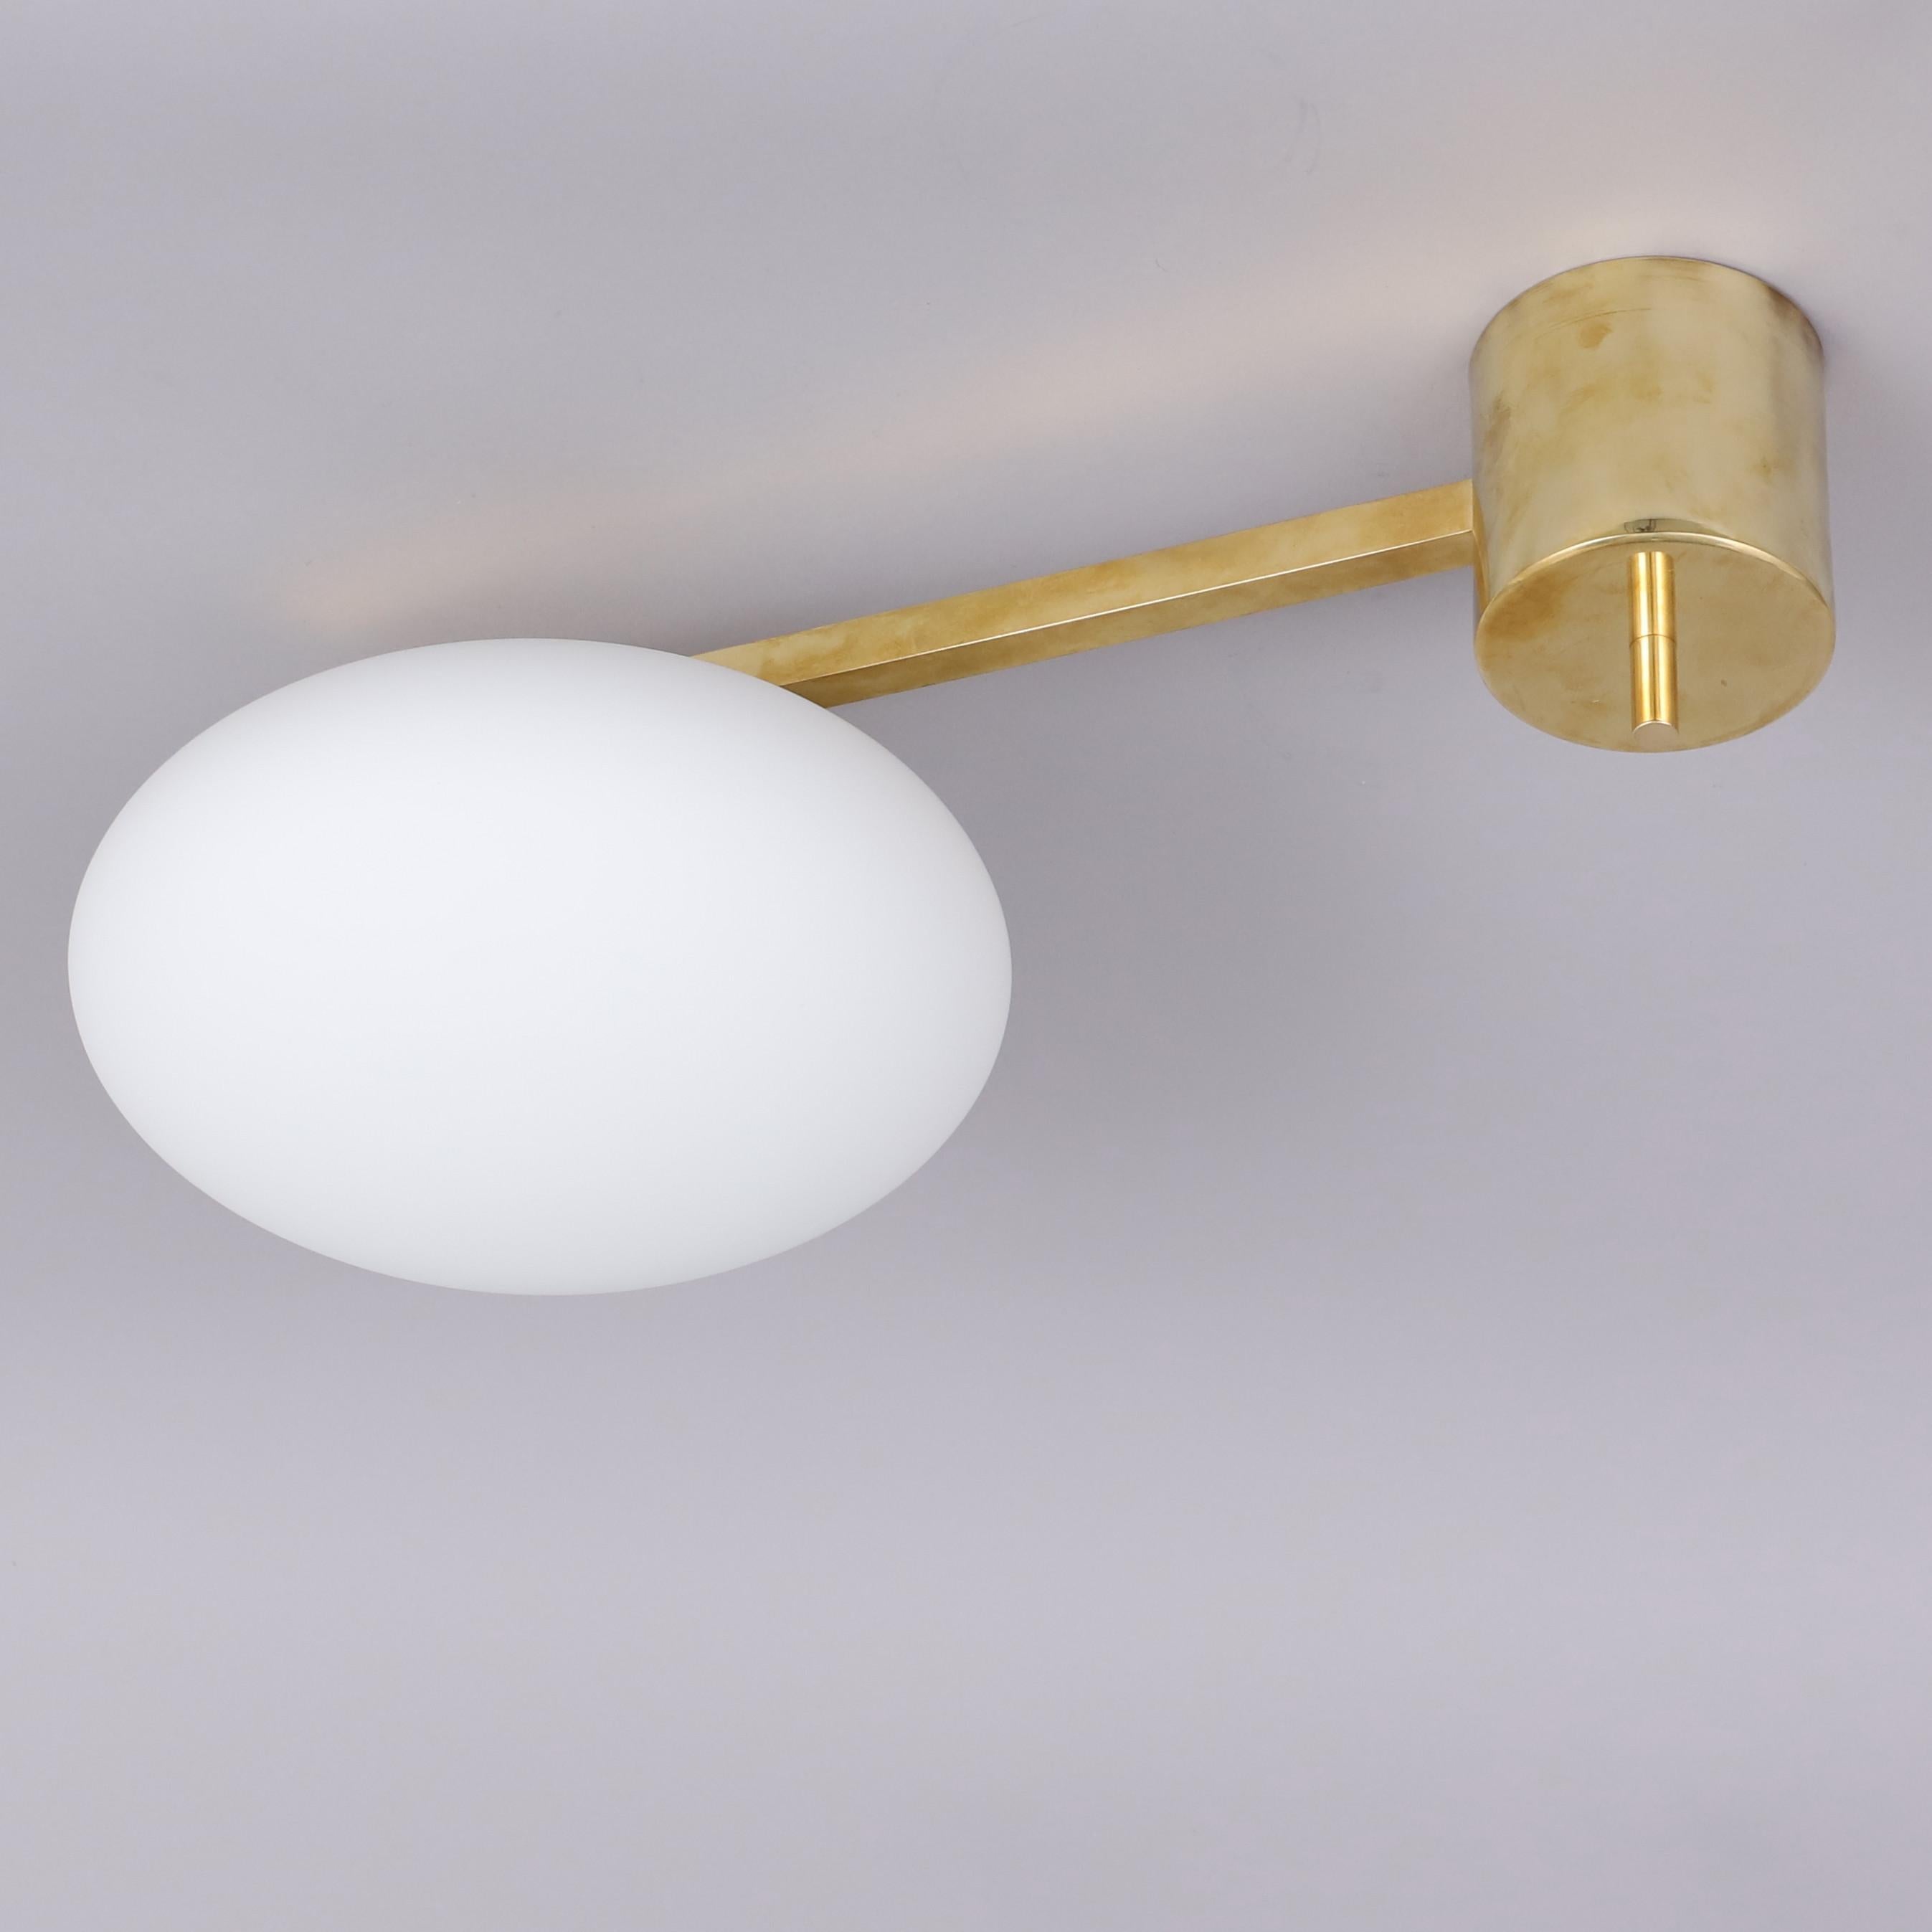 20th Century Asymmetric Ceiling Light in the Style of Angelo Lelli Made in Italy 1990s/2000s For Sale